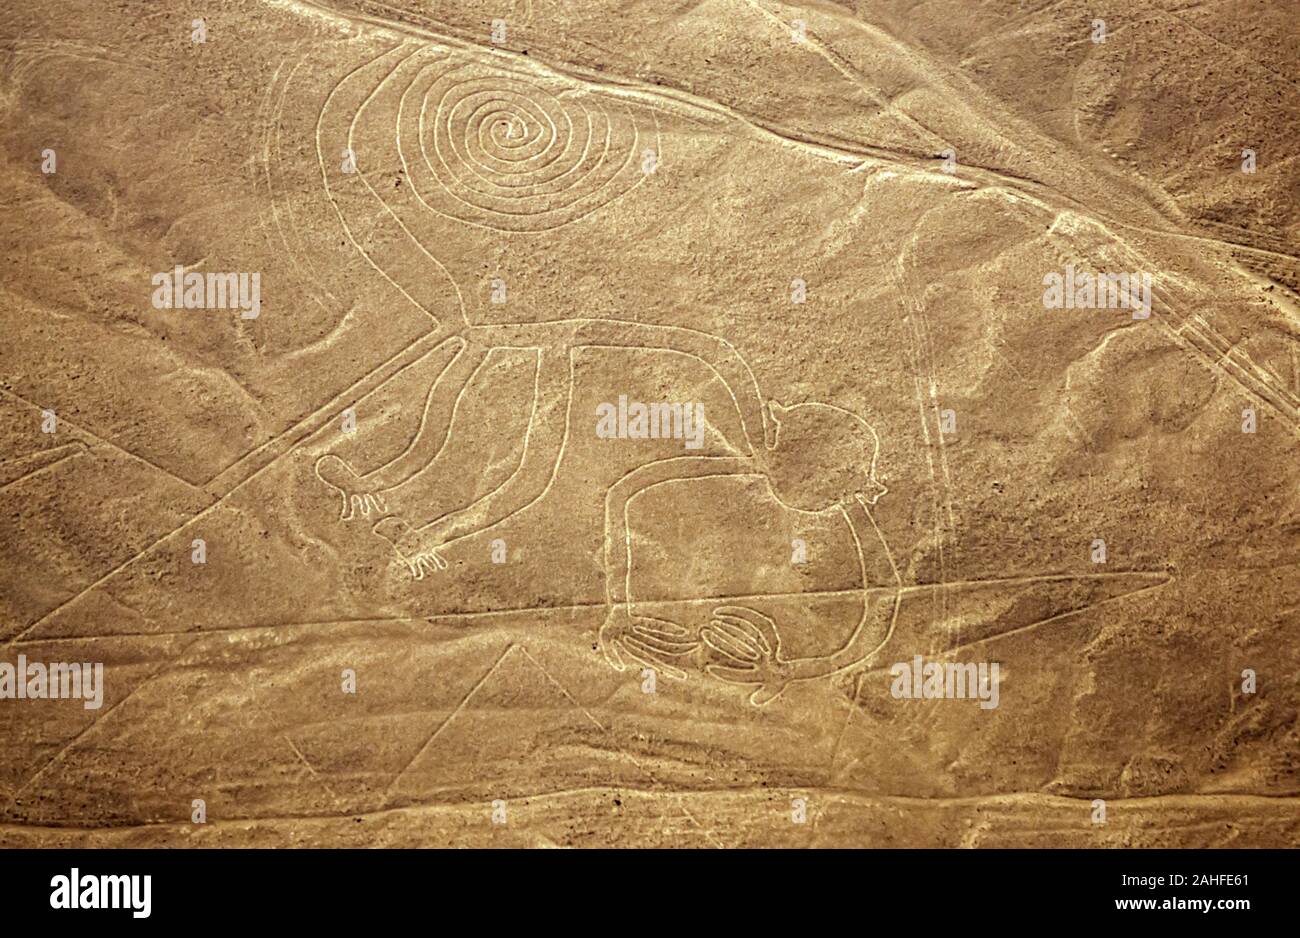 Aerial view of a monkey with a spiral tail. The Nazca Lines are a group of very large geoglyphs formed by depressions or shallow incisions made in the Stock Photo